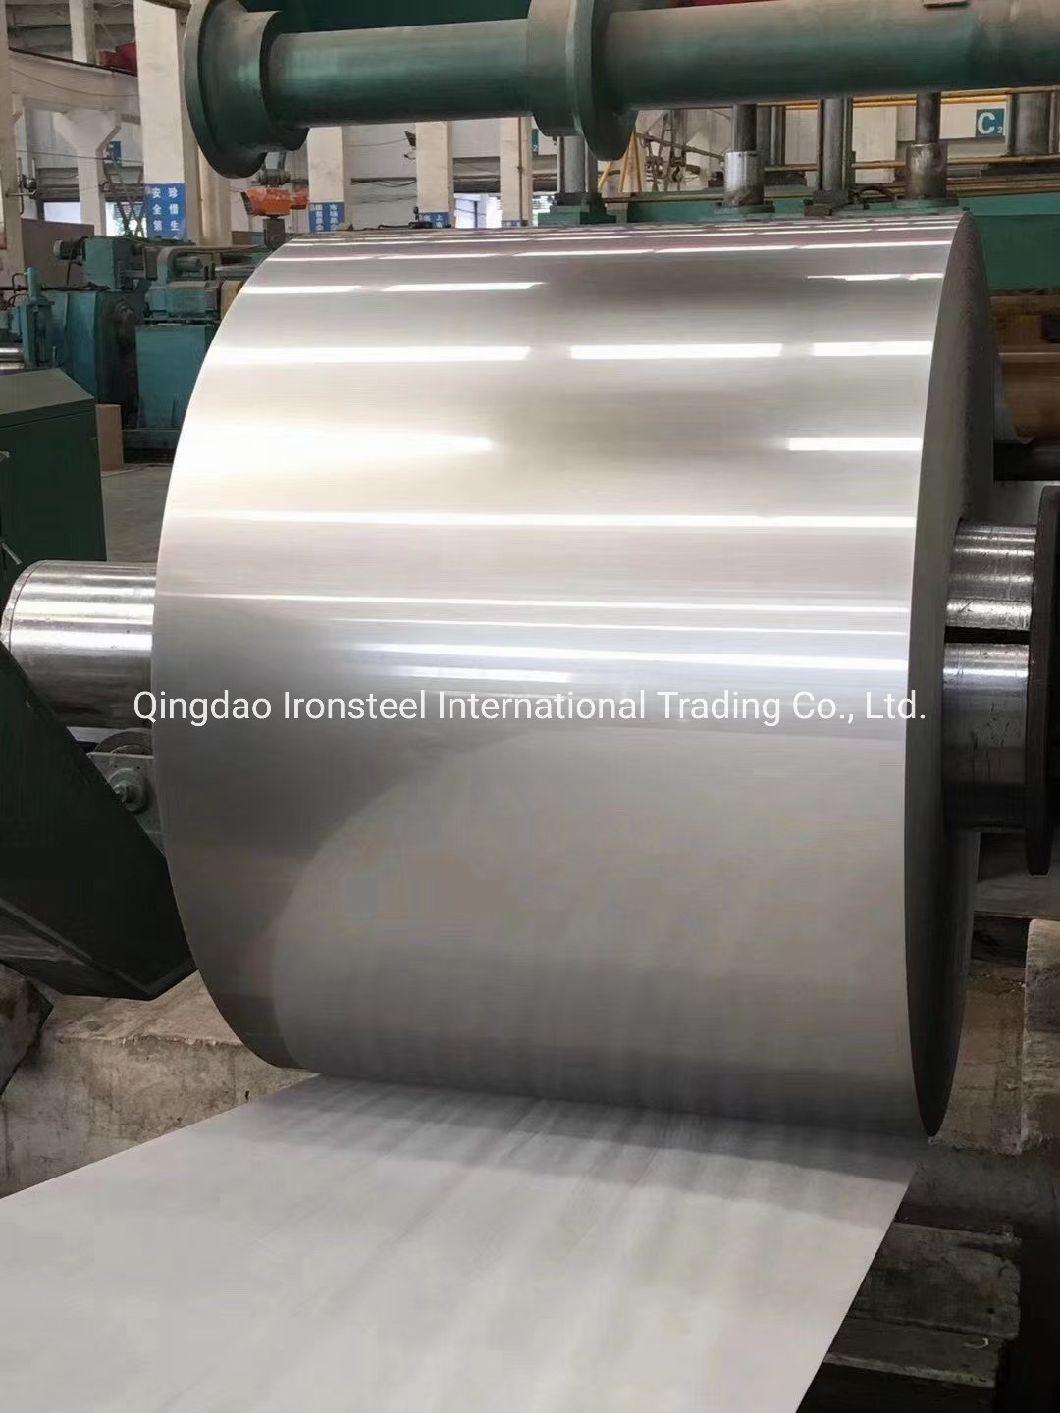 304L Cold Rolled Stainless Steel Coil